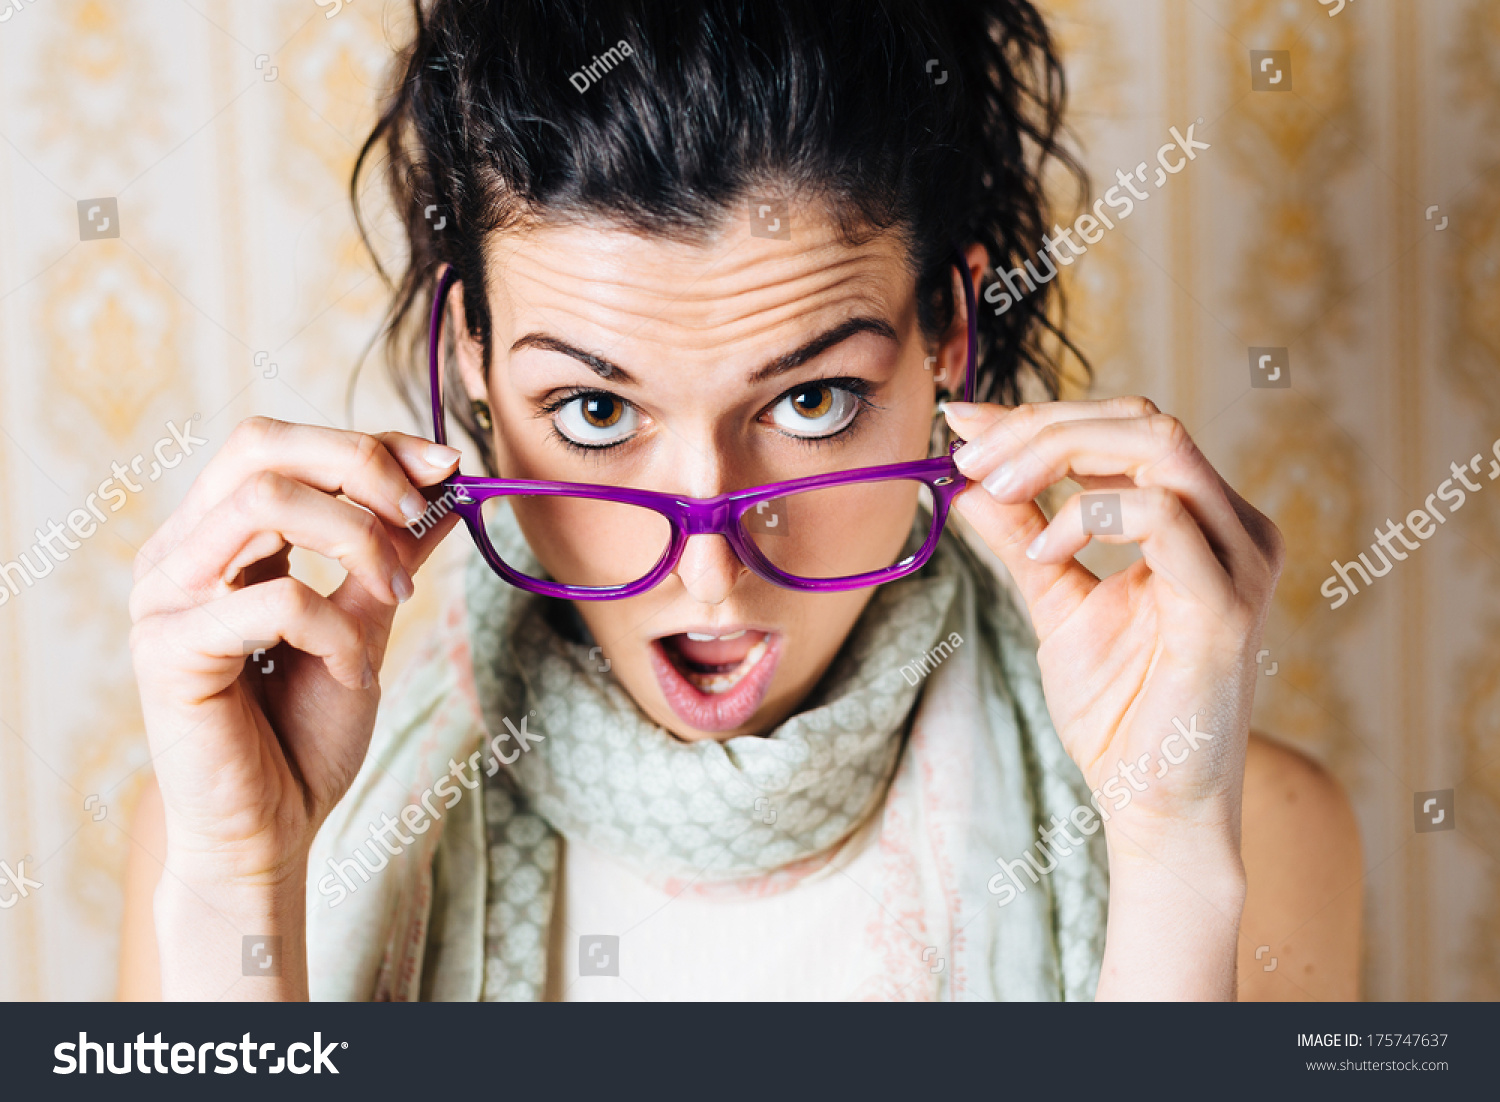 Surprised Woman Looking Over Her Glasses Beautiful Jaw Dropped Girl With Modern Eyewear Stock 2119